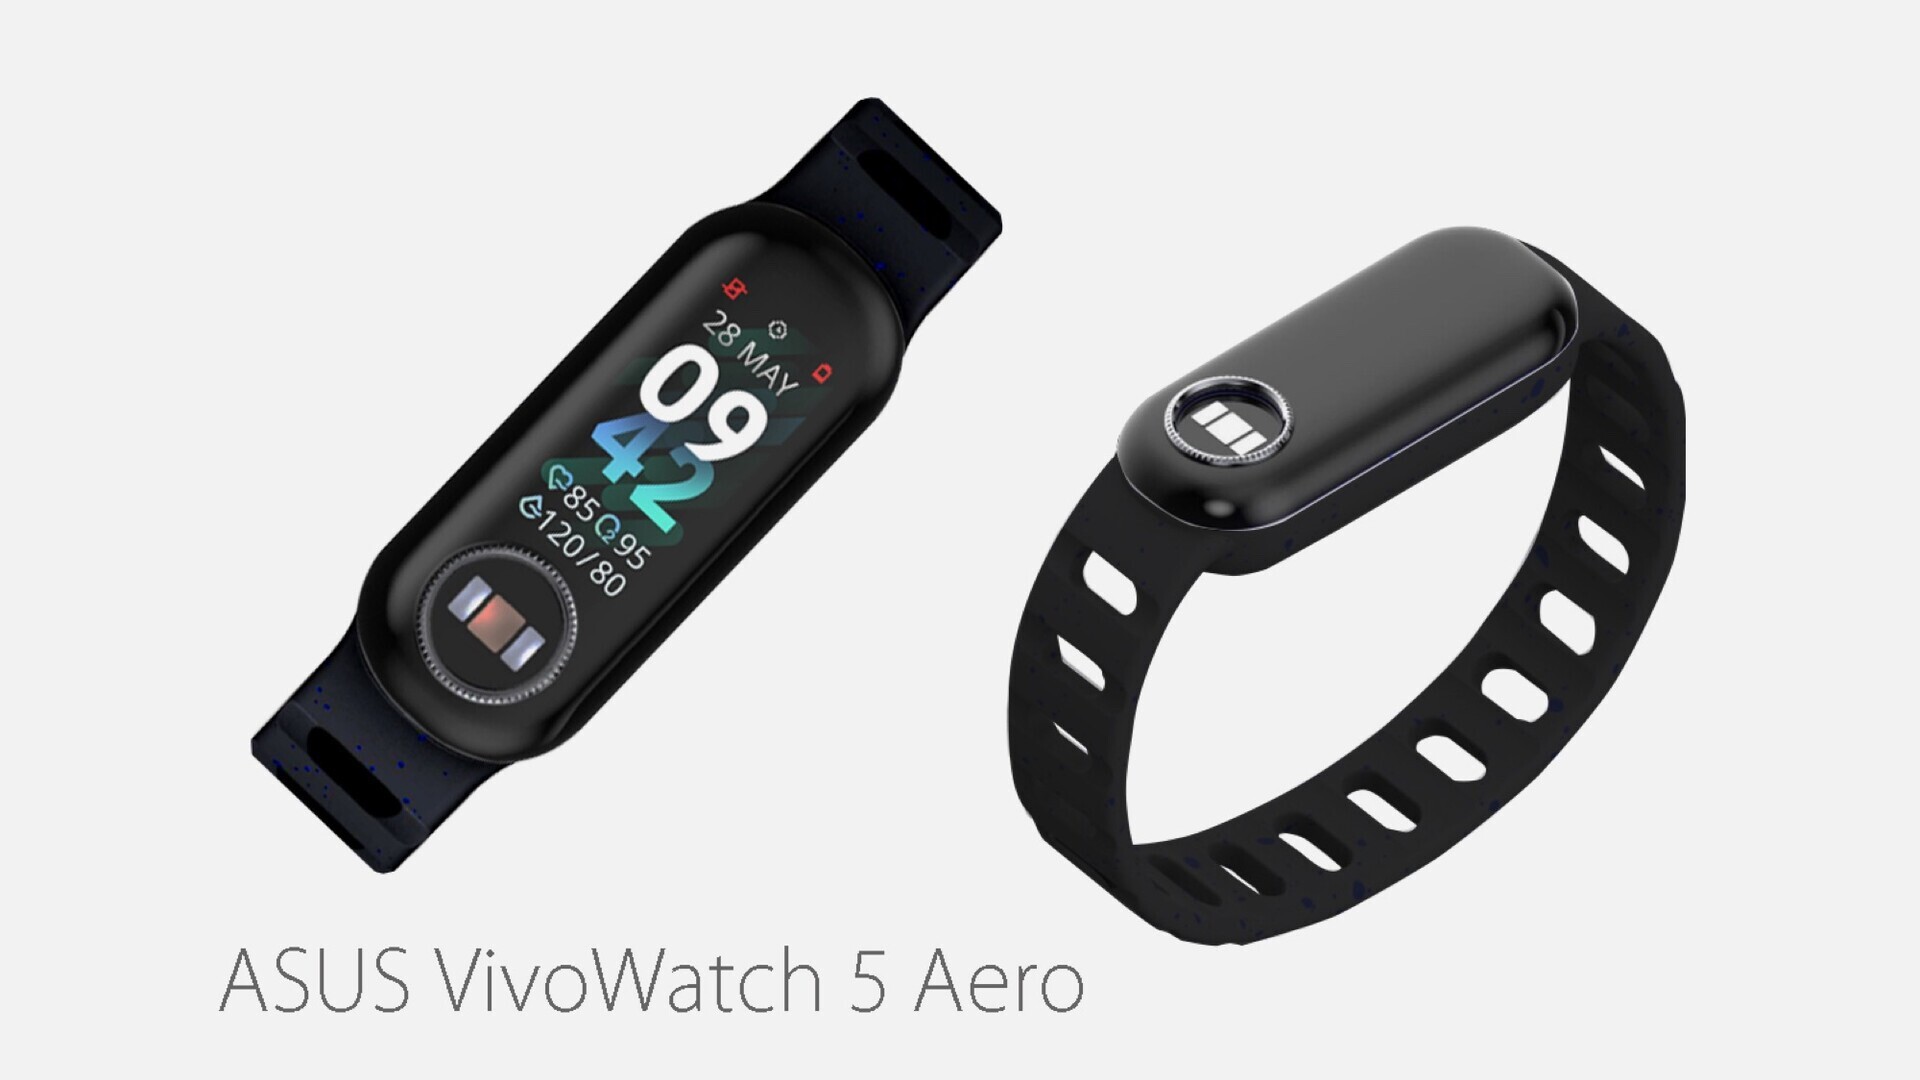 ASUS VivoWatch 5 Aero debuts in Taiwan with changed design ahead